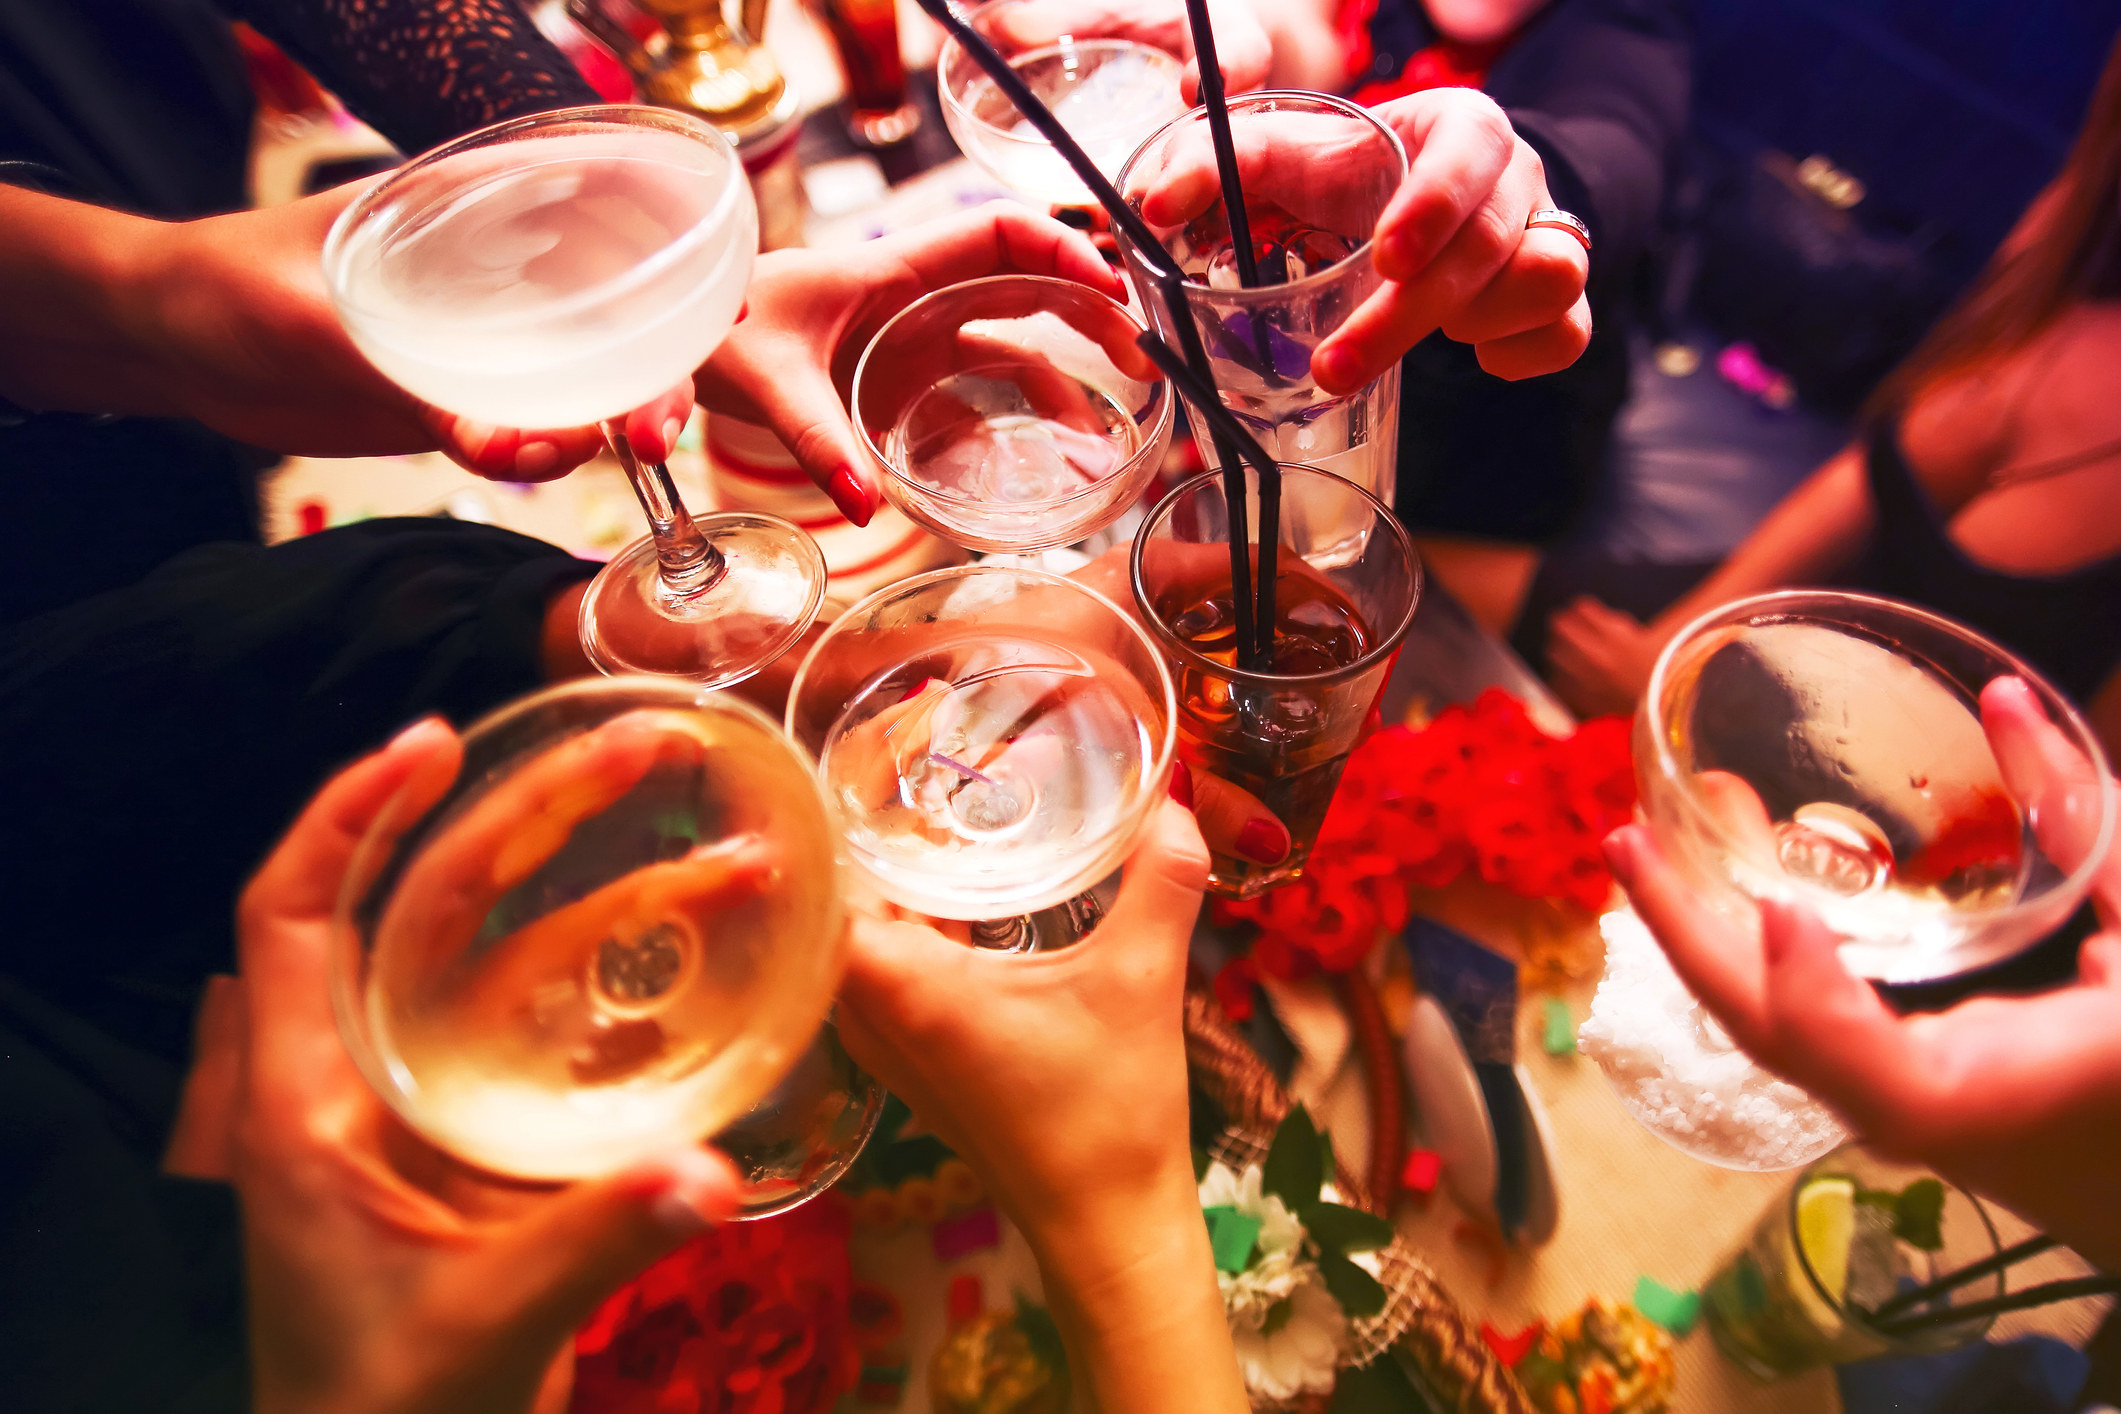 A stock image of people holding glasses of presumed alcohol up to cheers